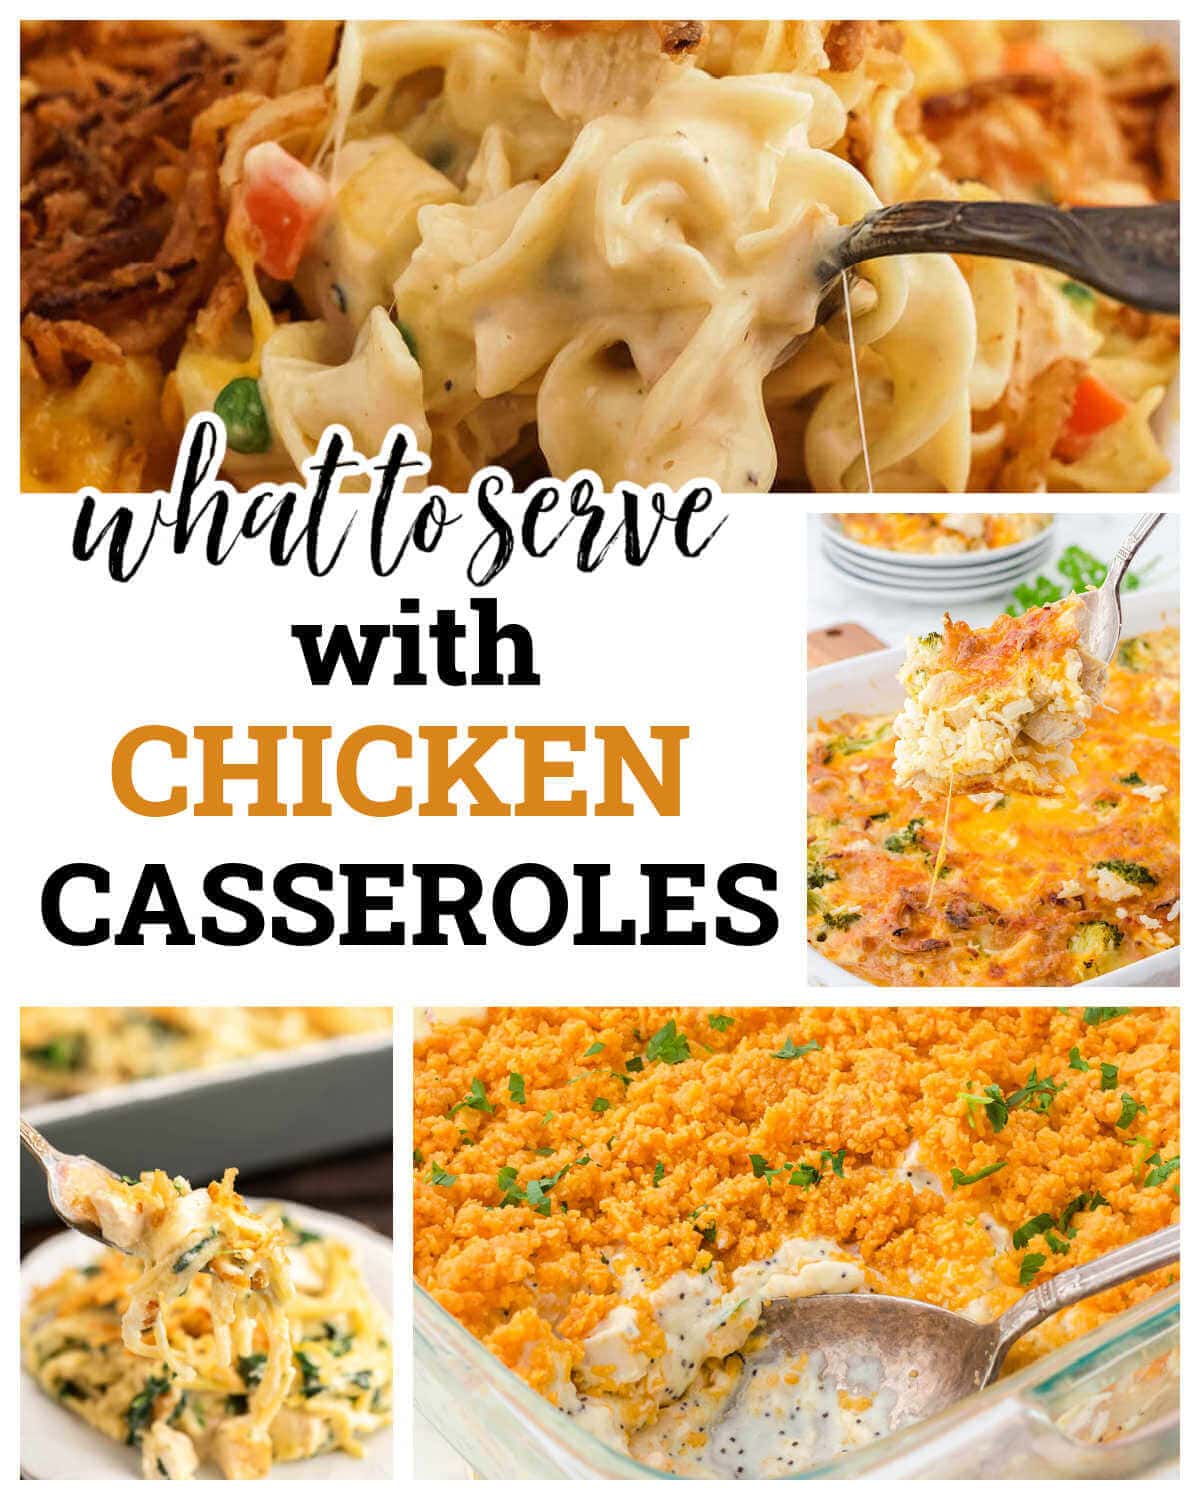 Collage of chicken casserole photos for what to serve with chicken casseroles. With print overlay.